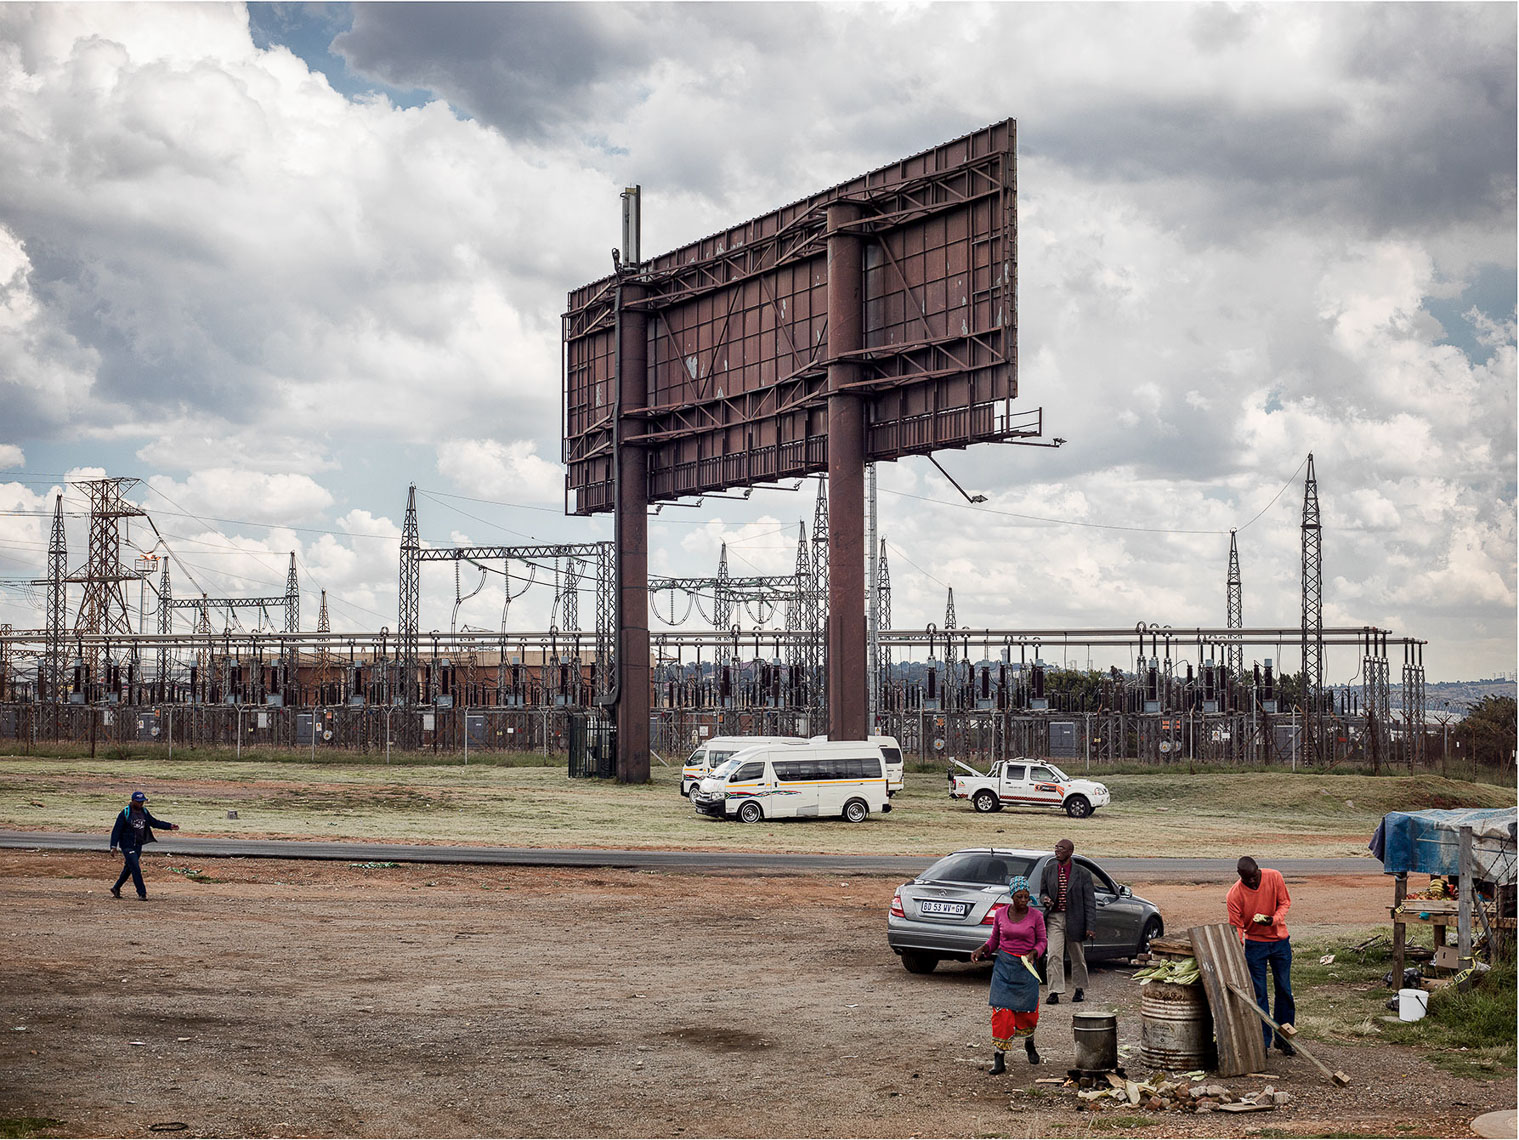 Empty billboard in an industrial landscape with hawkers and taxis. 